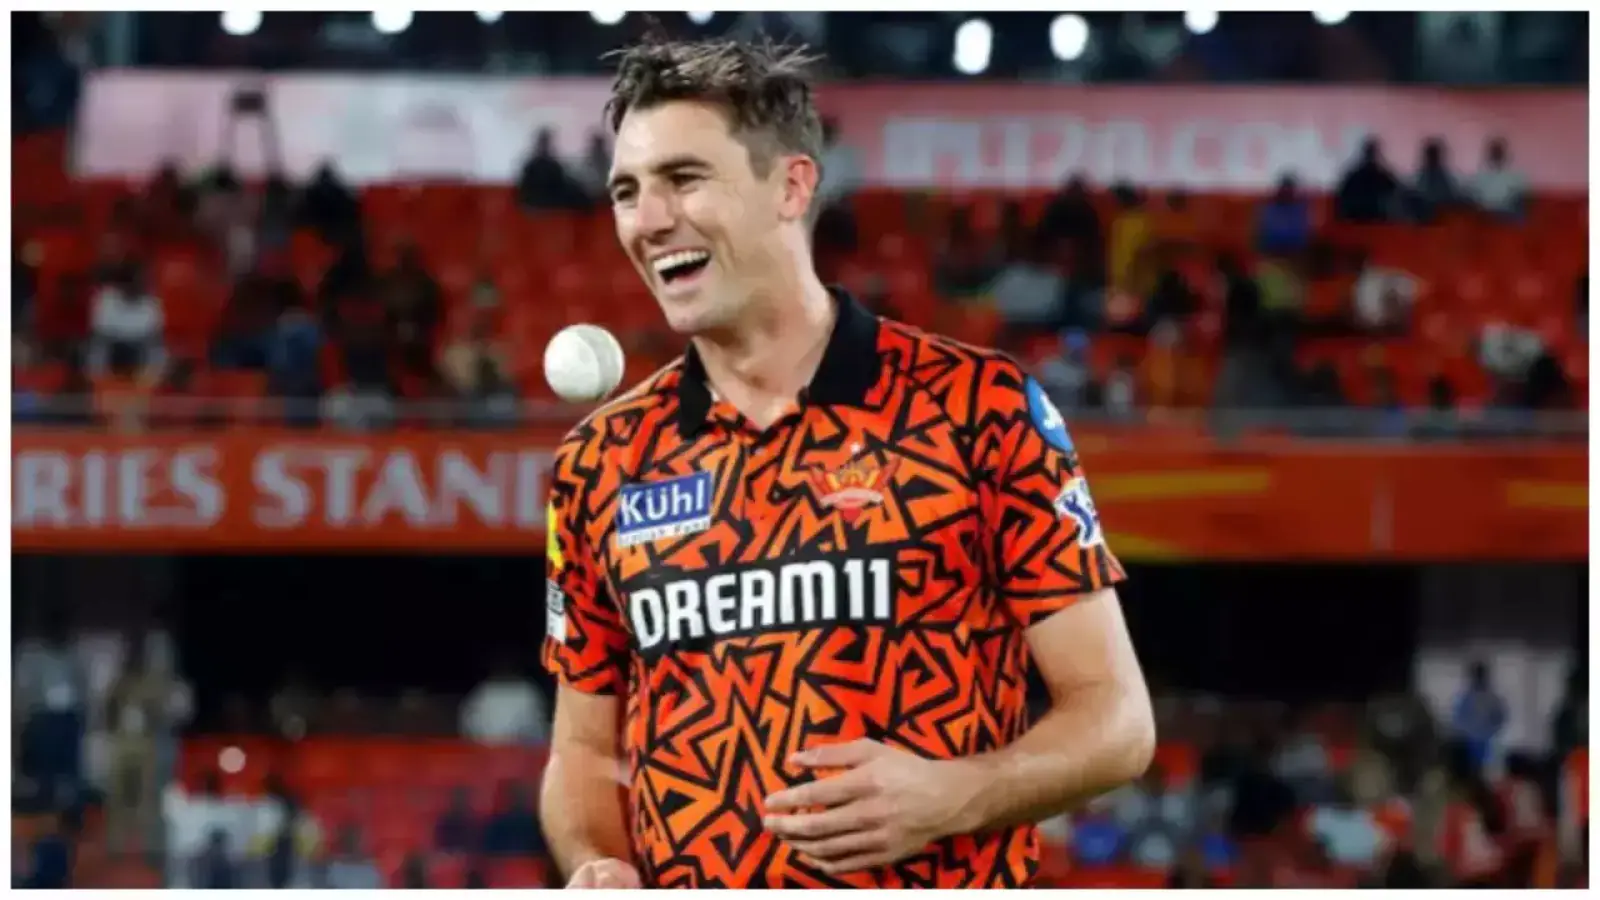 'I wouldn't like to bowl to him, he scares me', SRH captain Pat Cummins is scared of India's young batsman